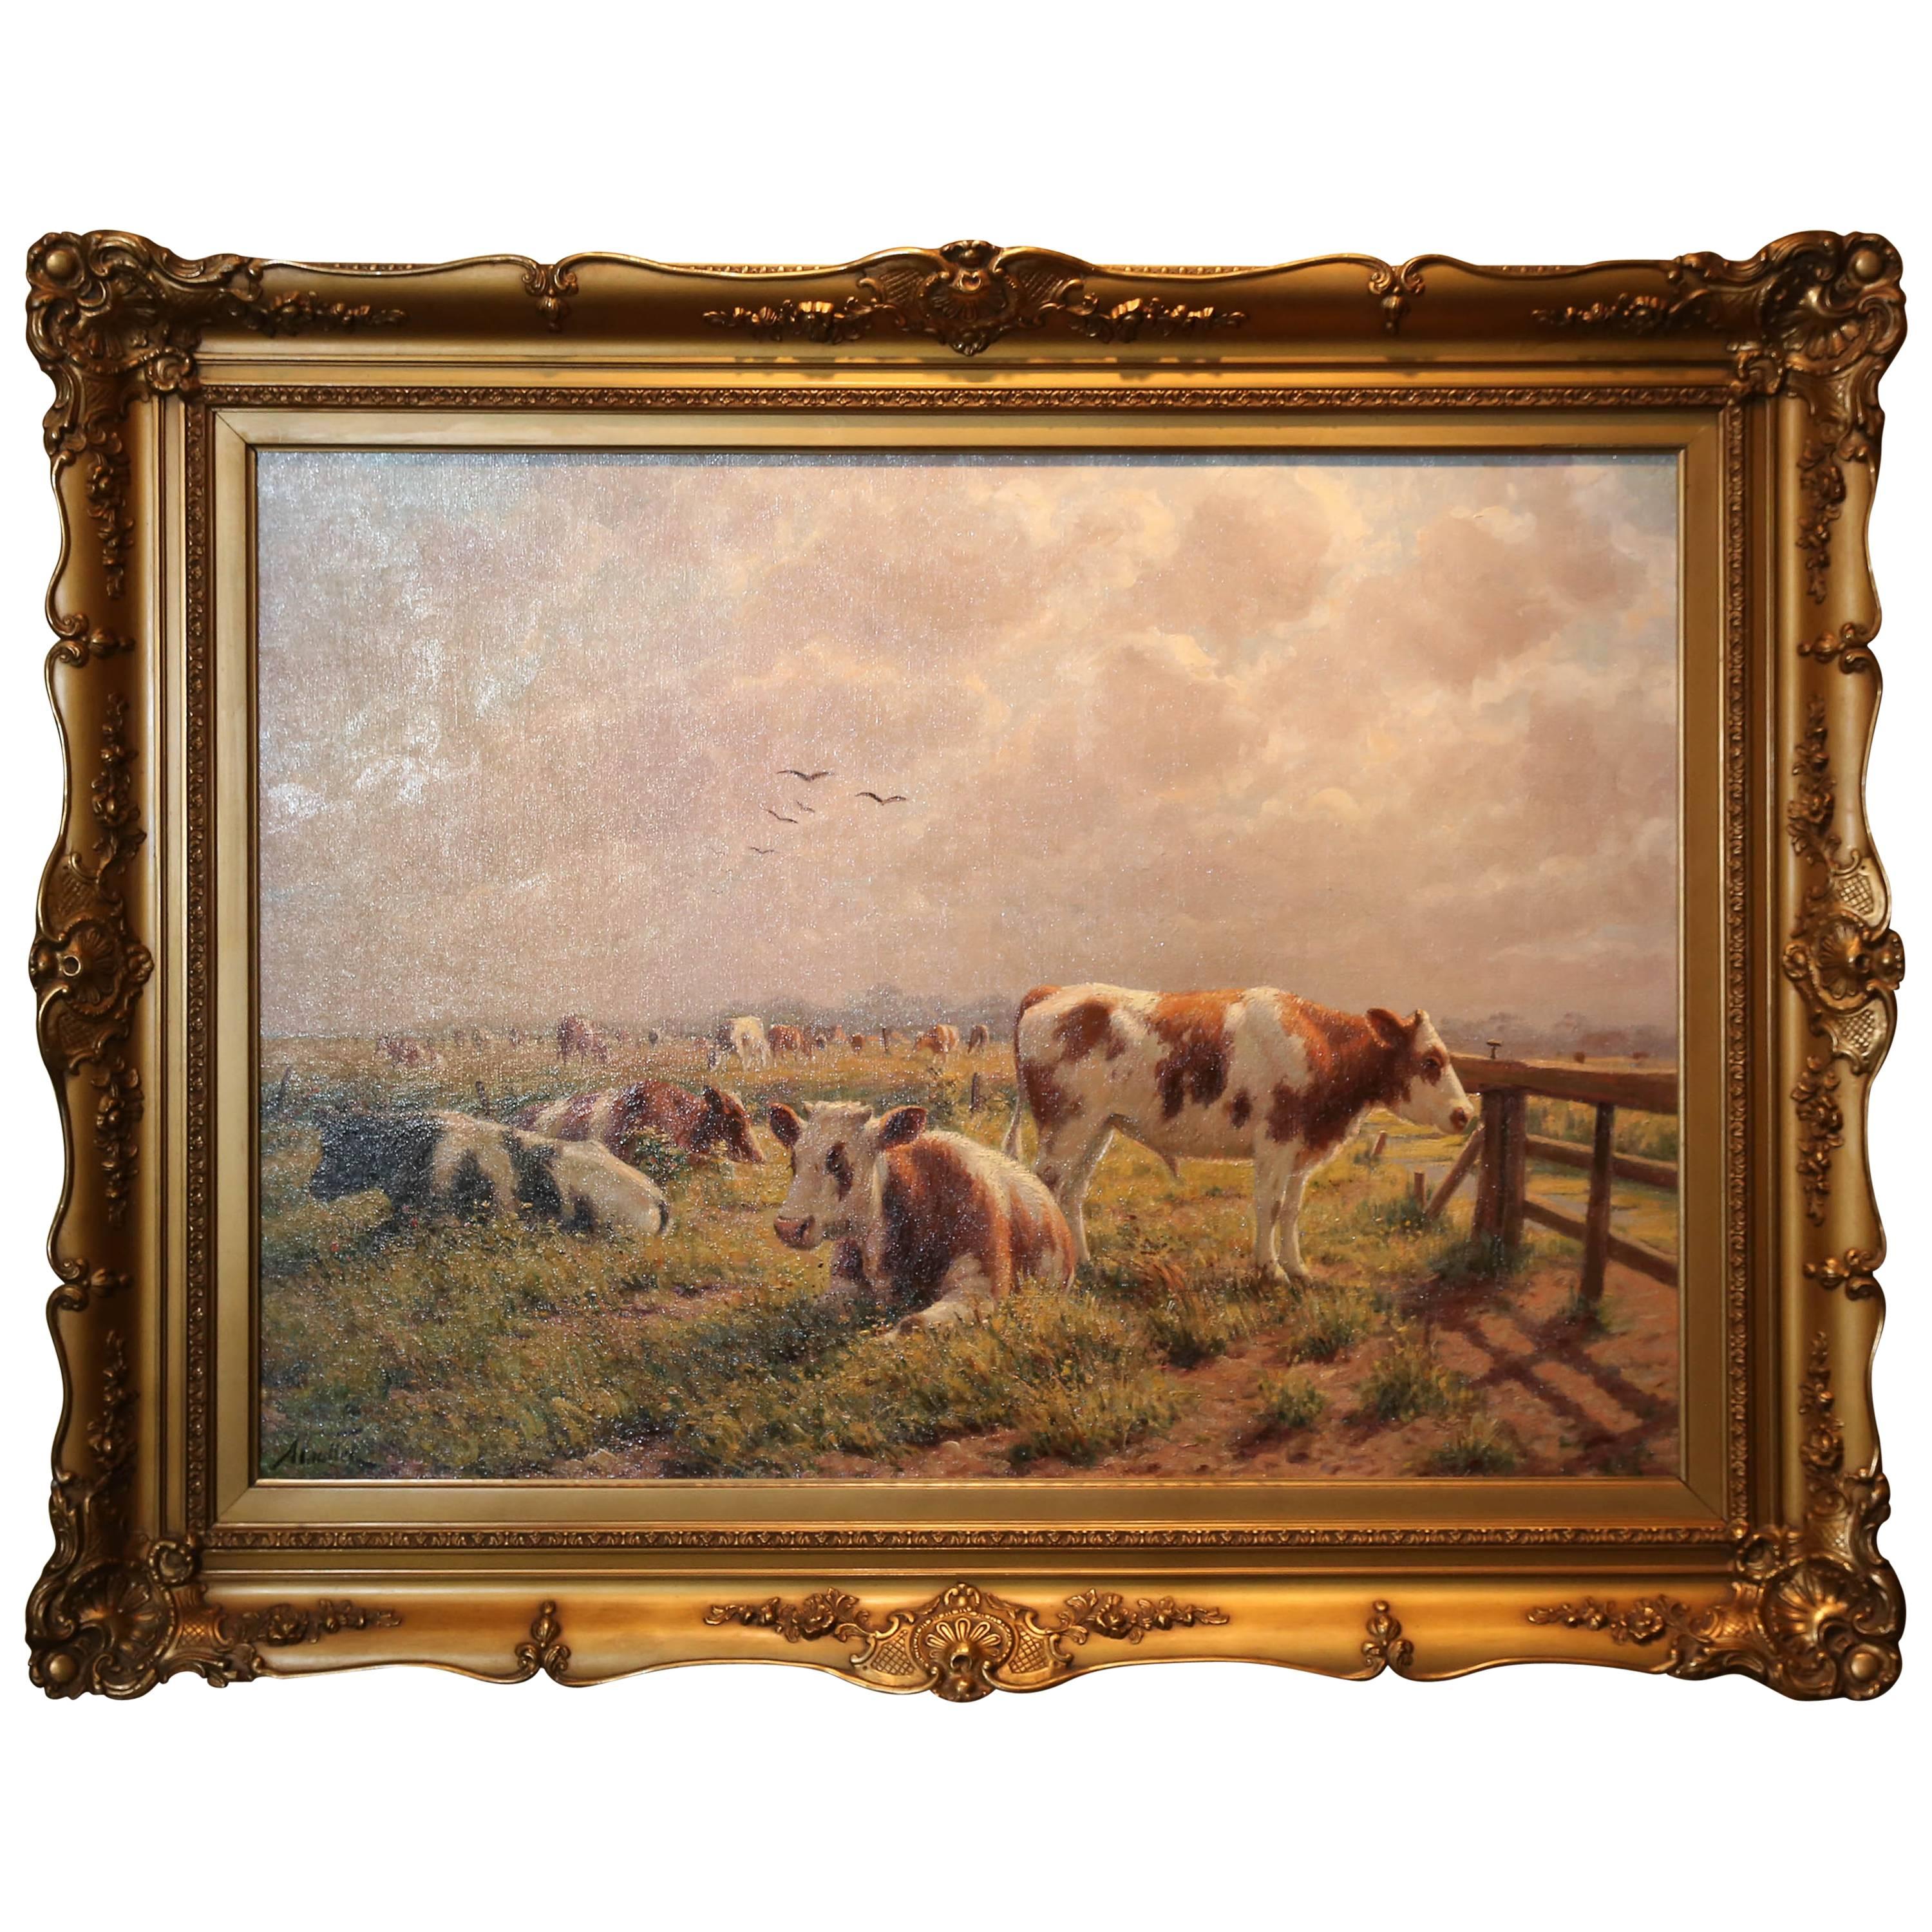 Oil on Canvas 'Cattle Grazing in a Pasture' by Albert Caullet Signed a Caullet